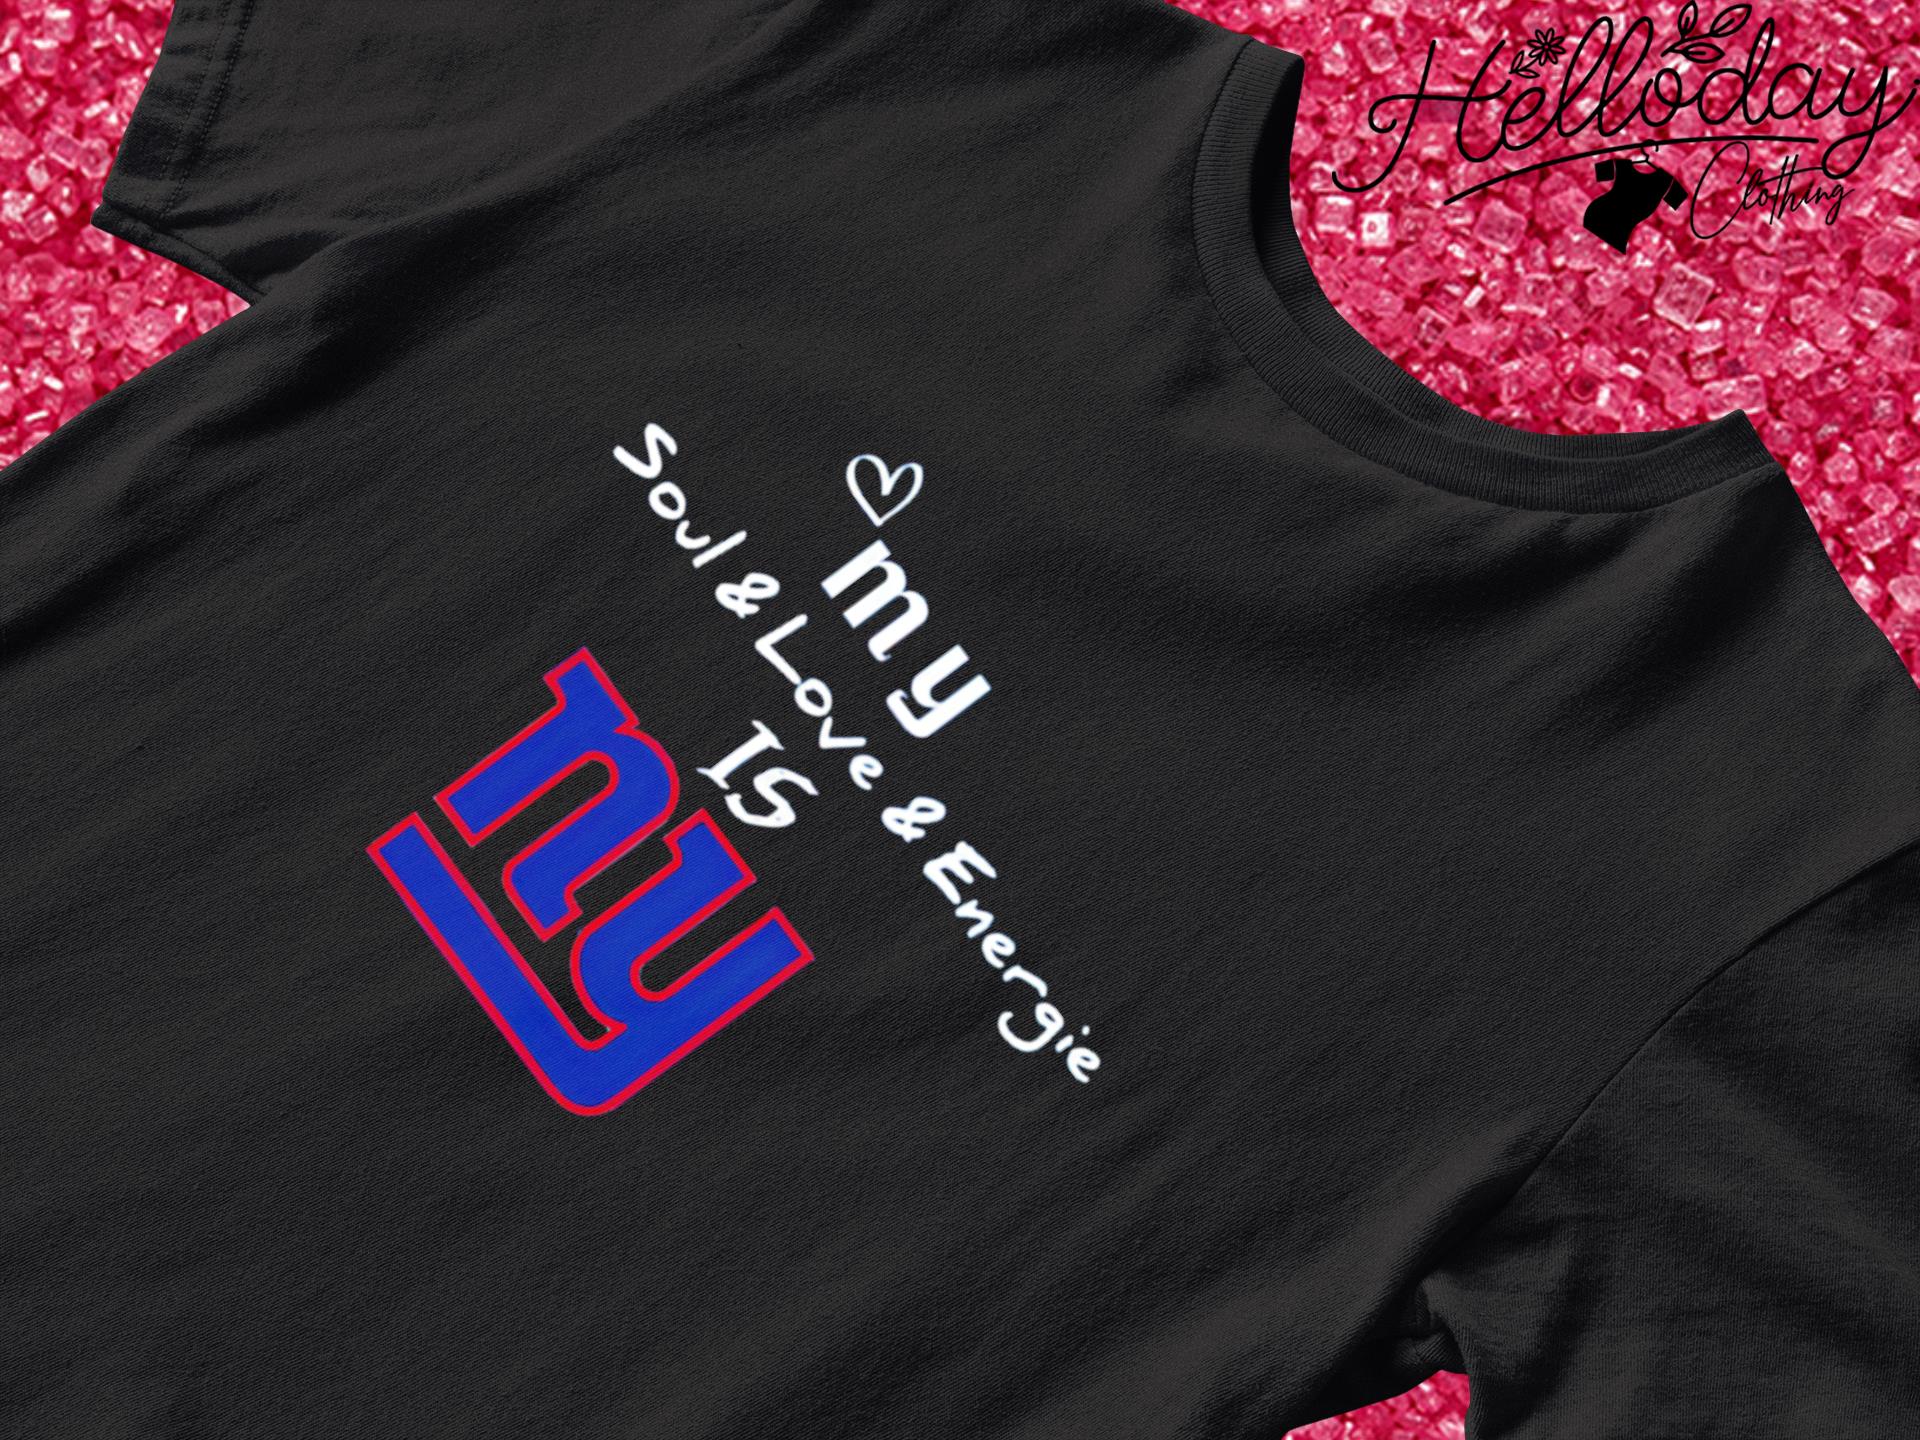 New York Giants my soul and love and energie shirt